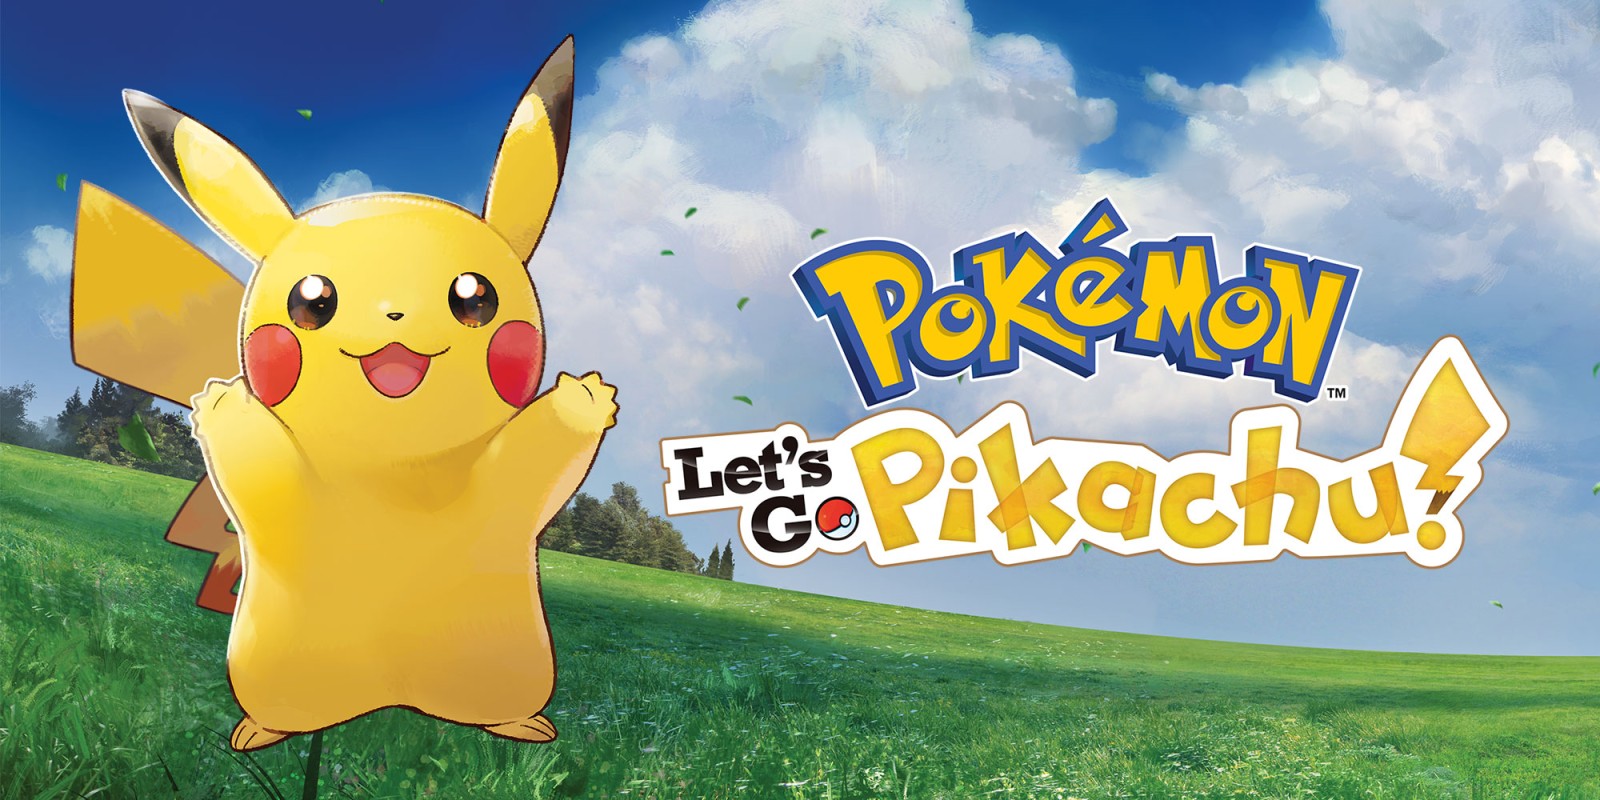 Pikachu's Role In The Pokemon Let's Go Games - Impact On Gameplay And Player Experience